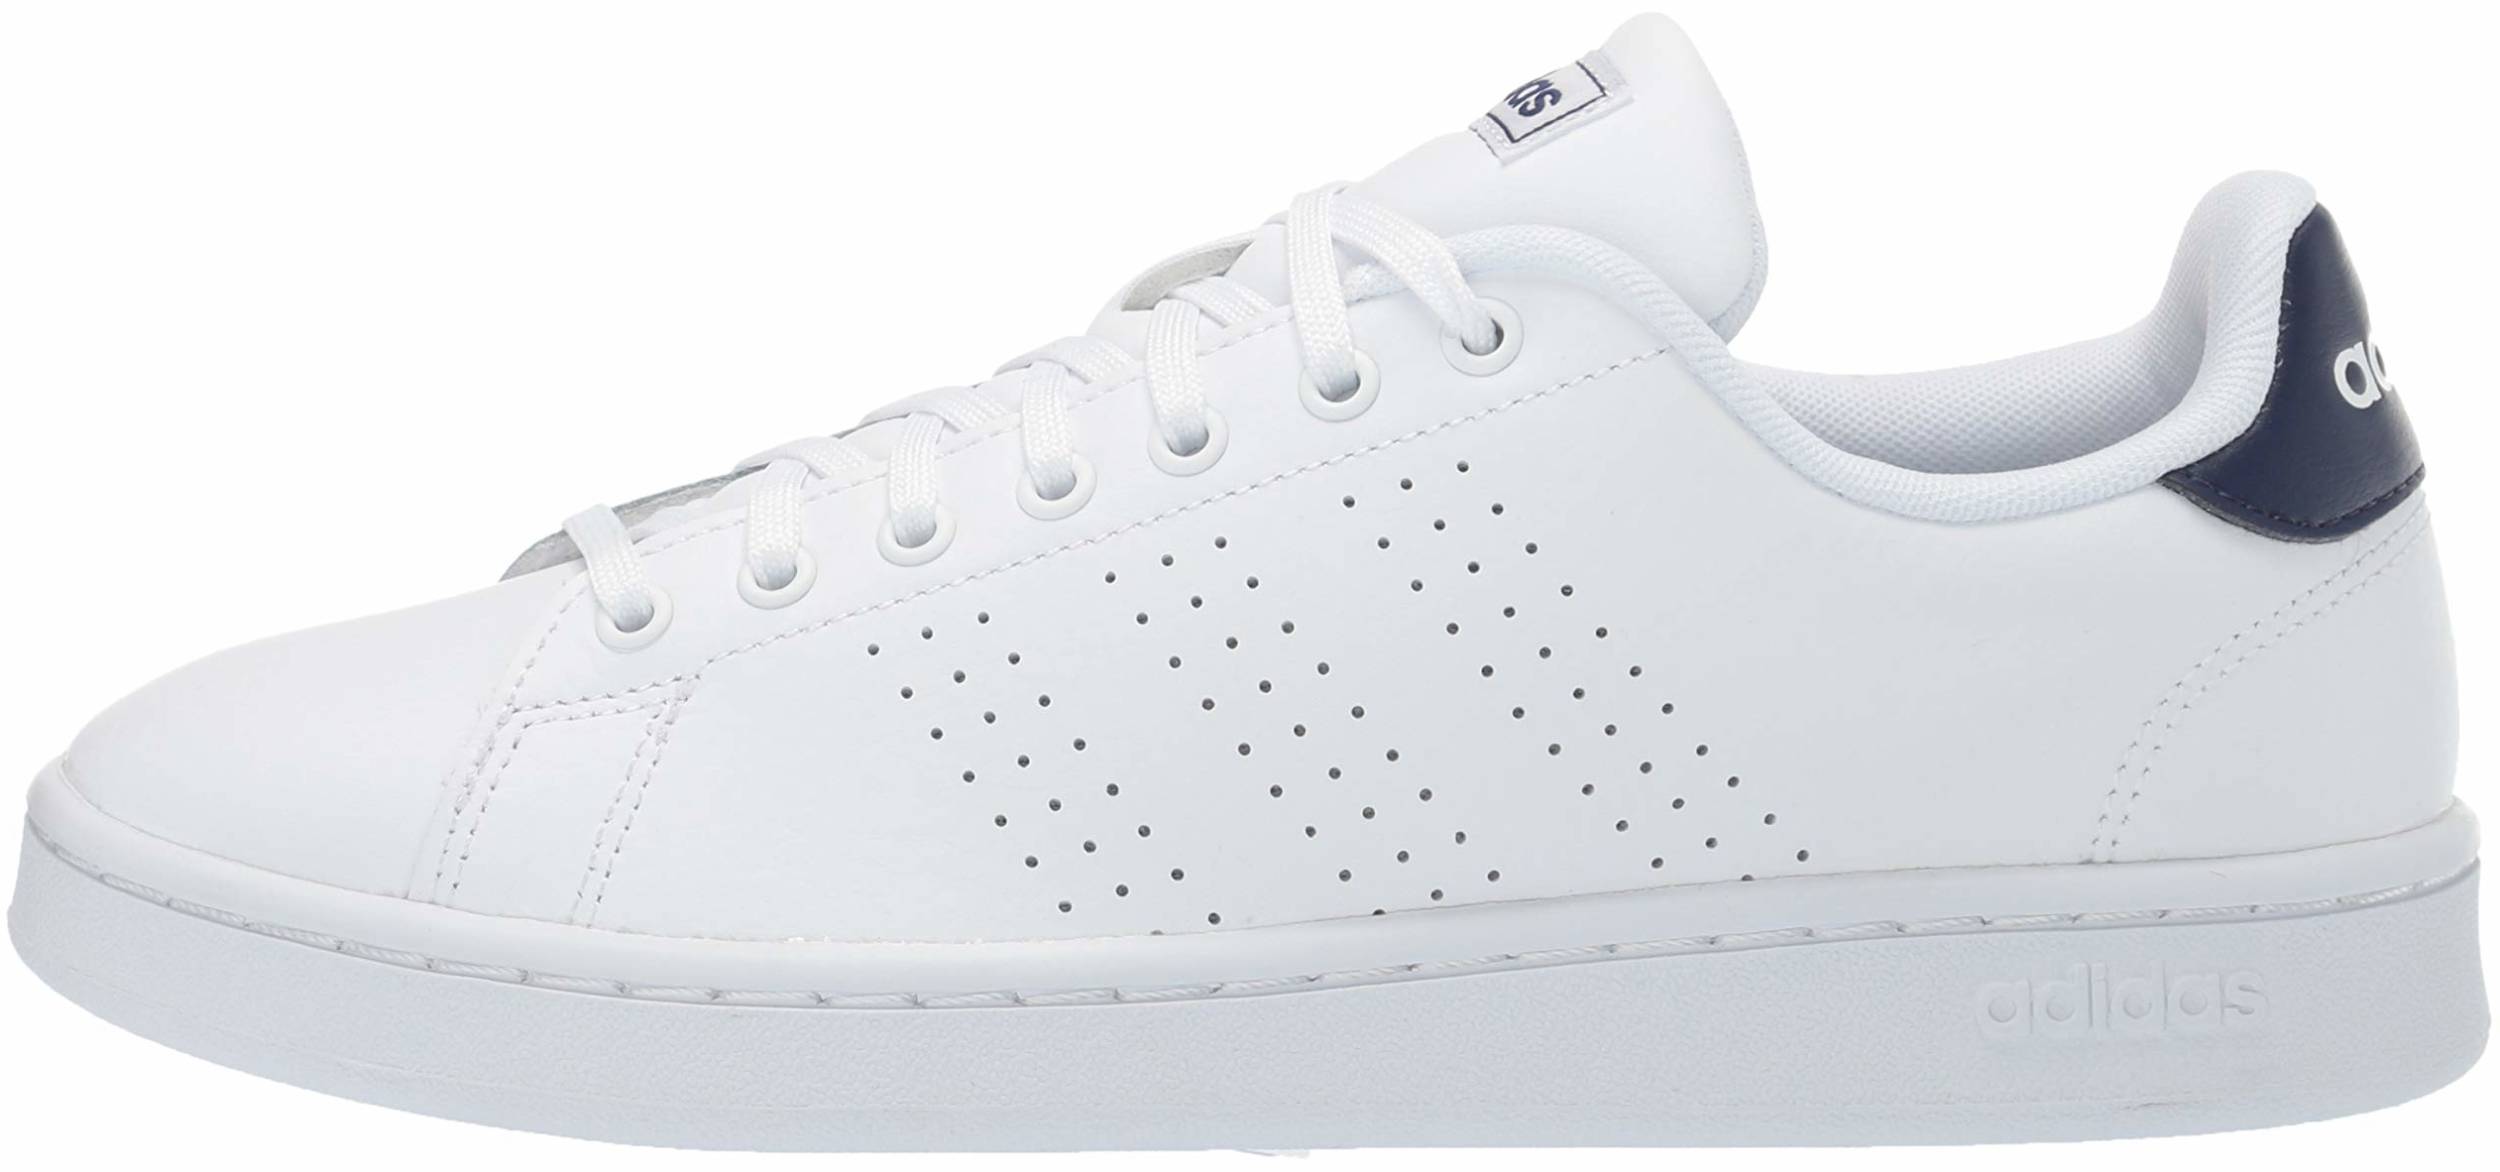 Adidas White Advantage Online Hotsell, UP TO 64% OFF